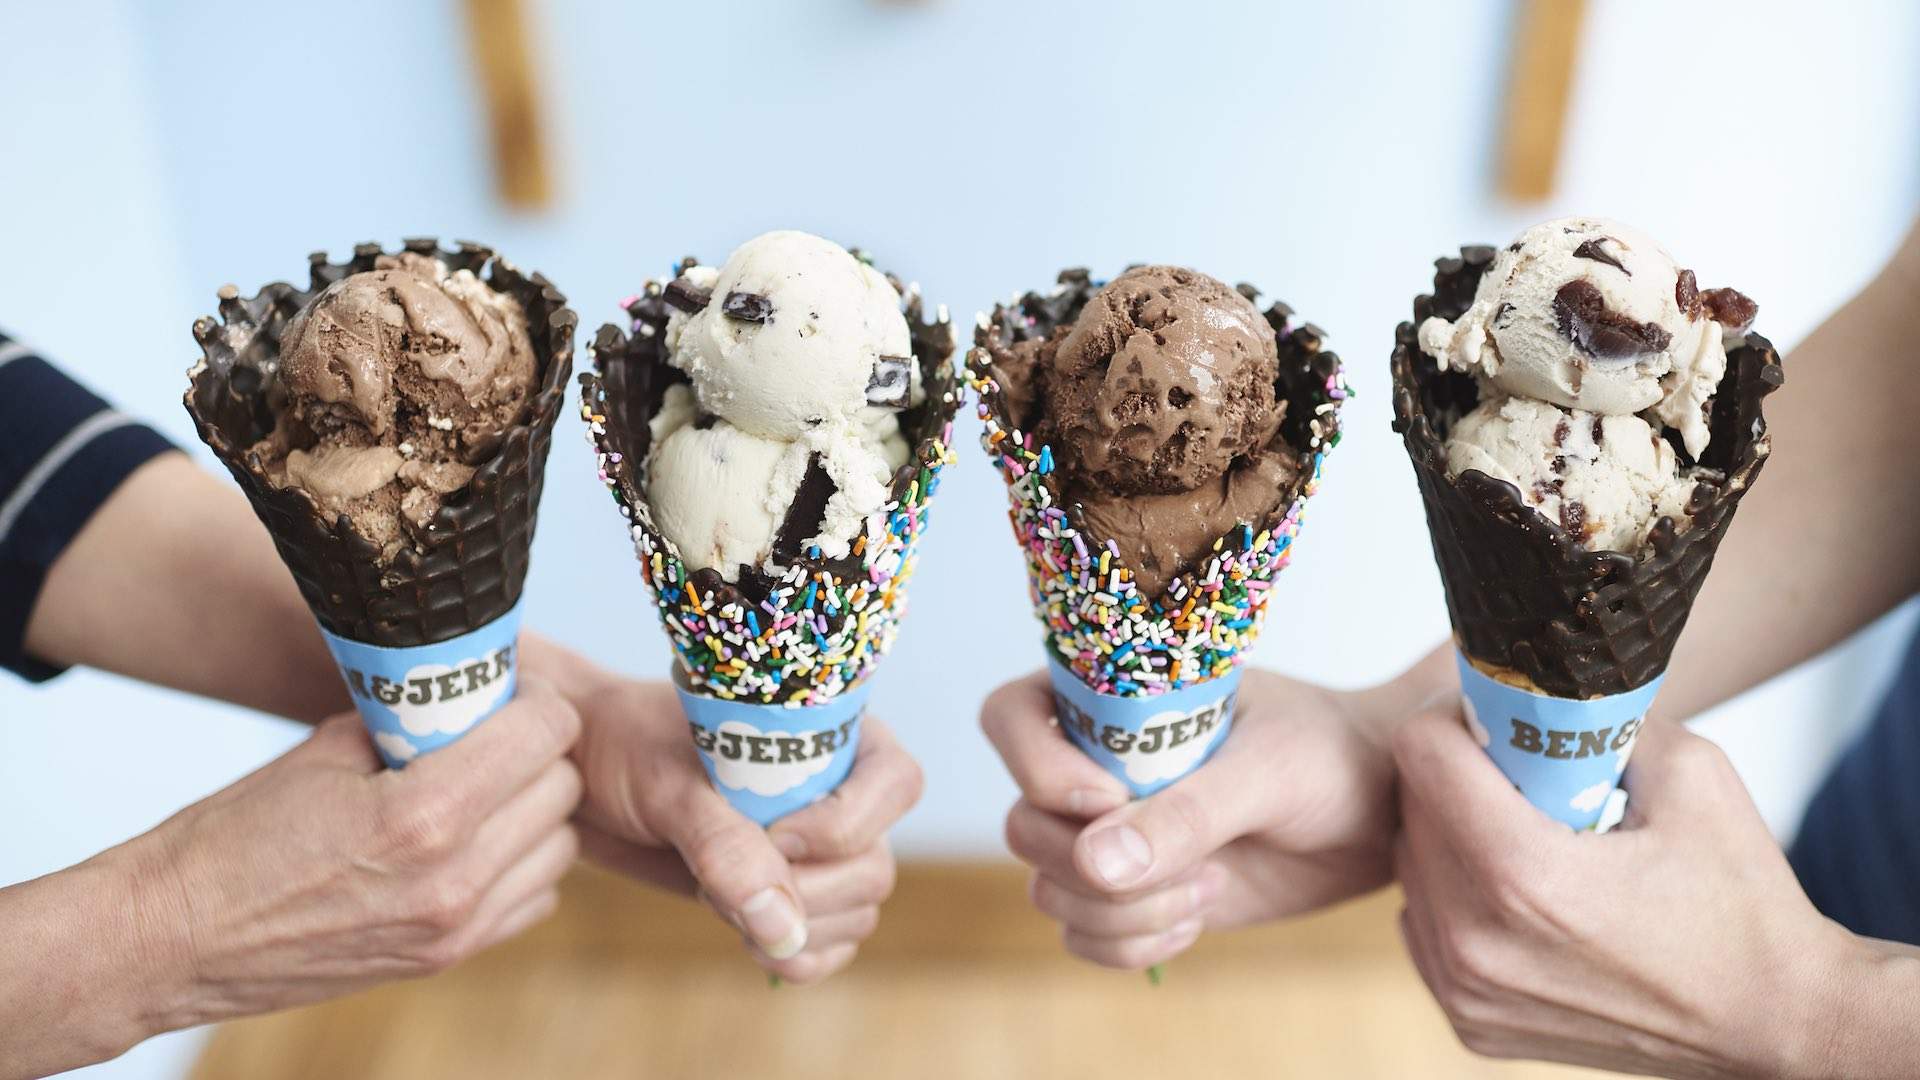 Ben & Jerry's Inside Scoop: Spin to Win